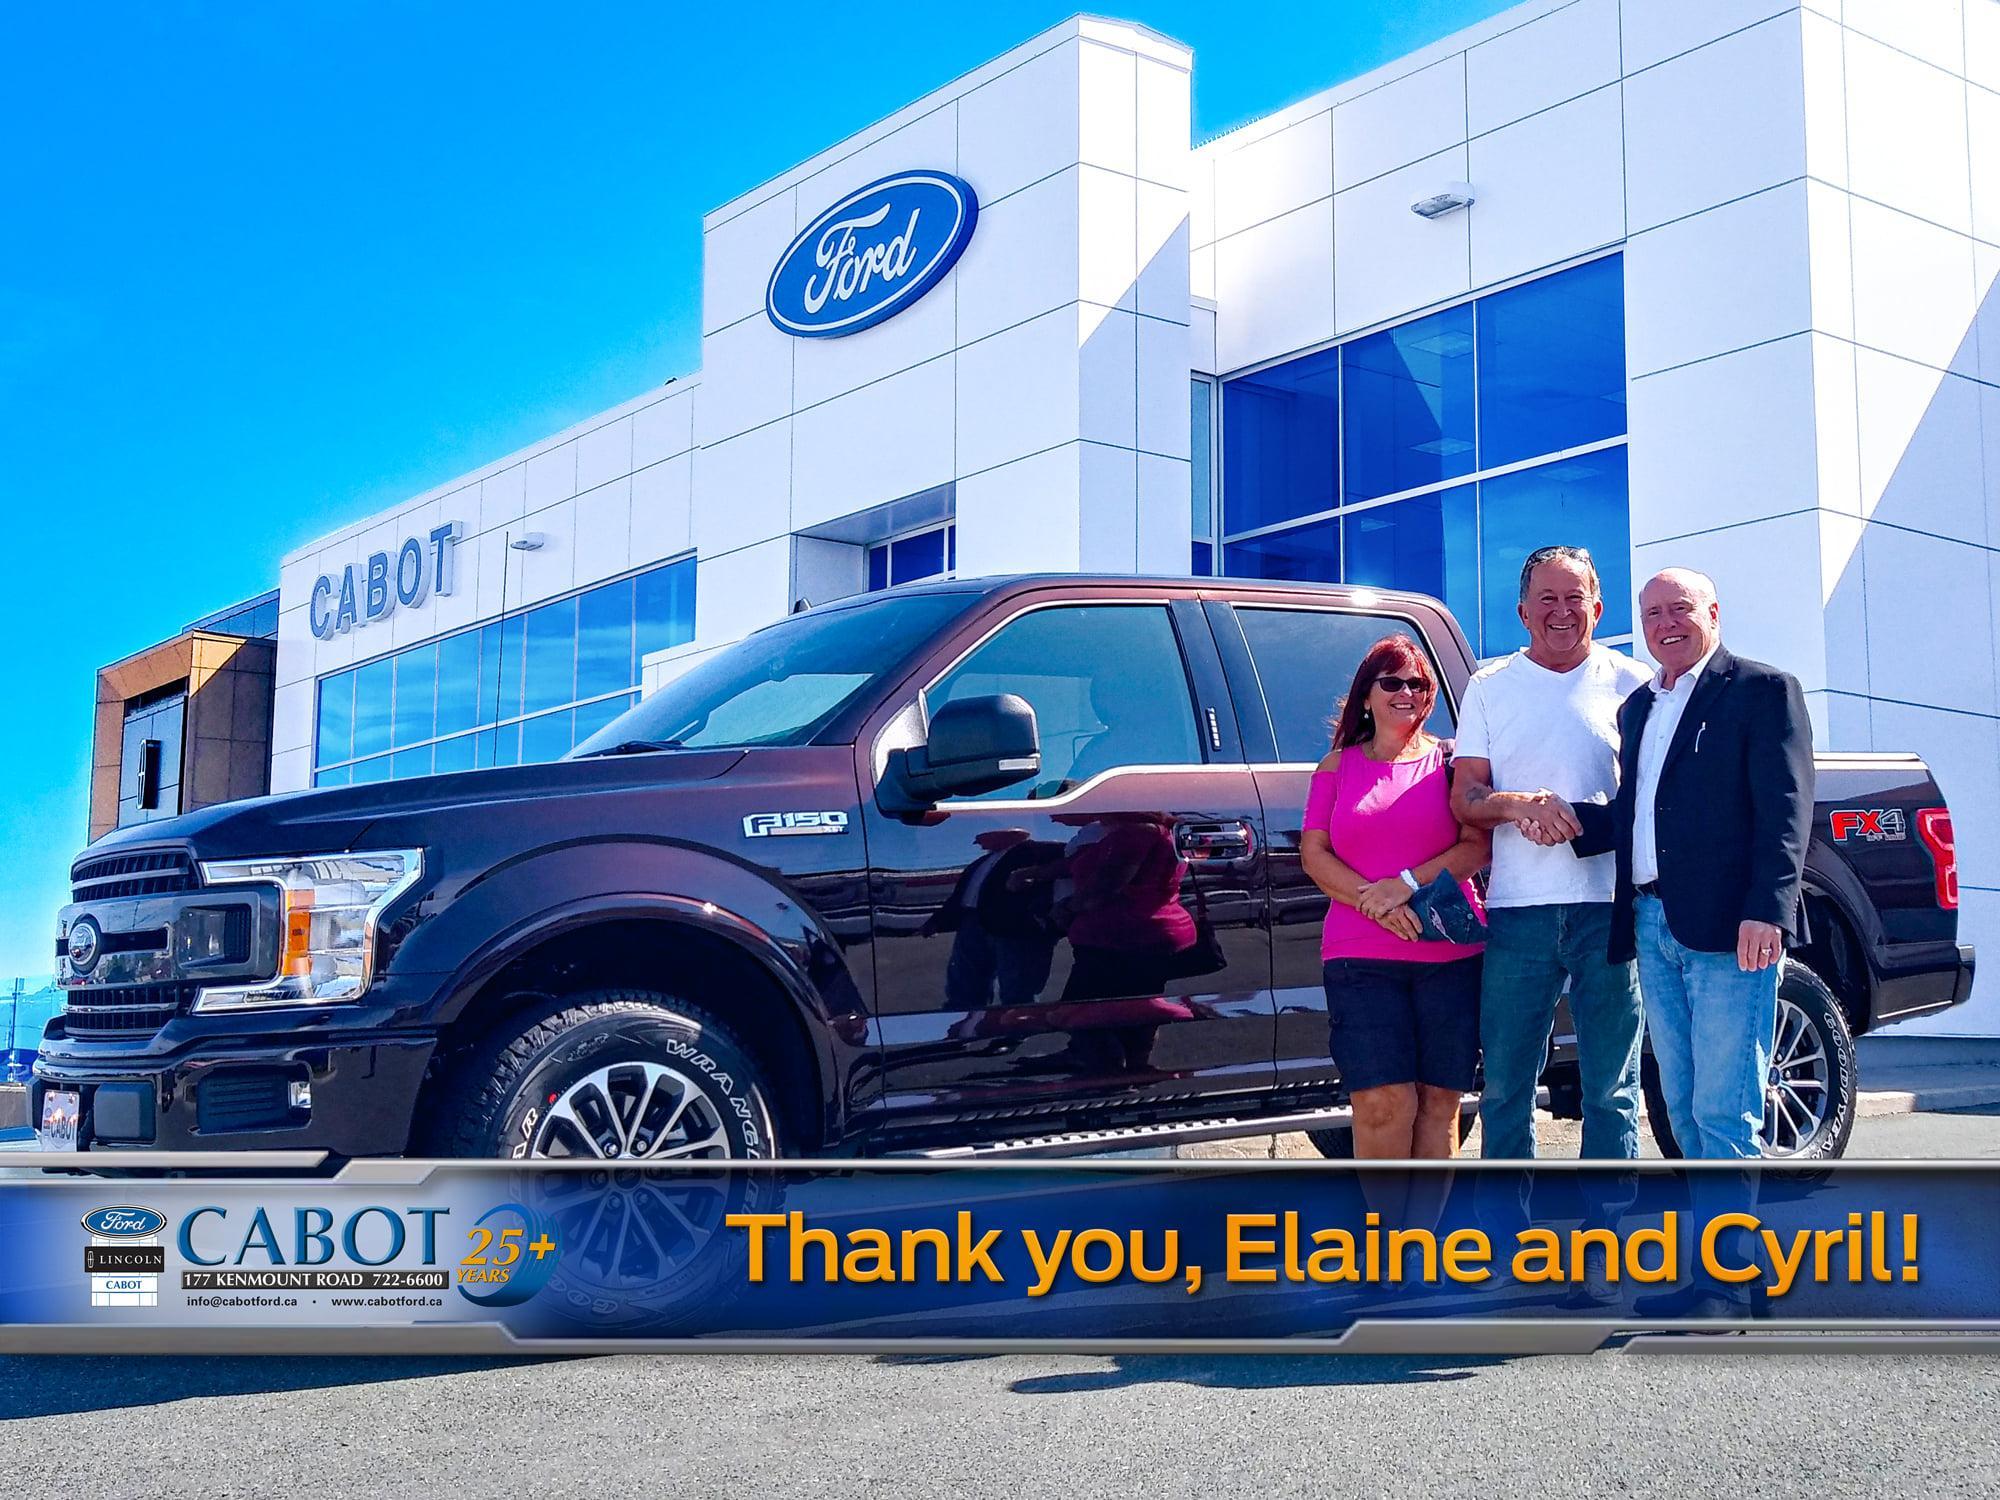 Ford Meet Some of Our F-150 Customers image